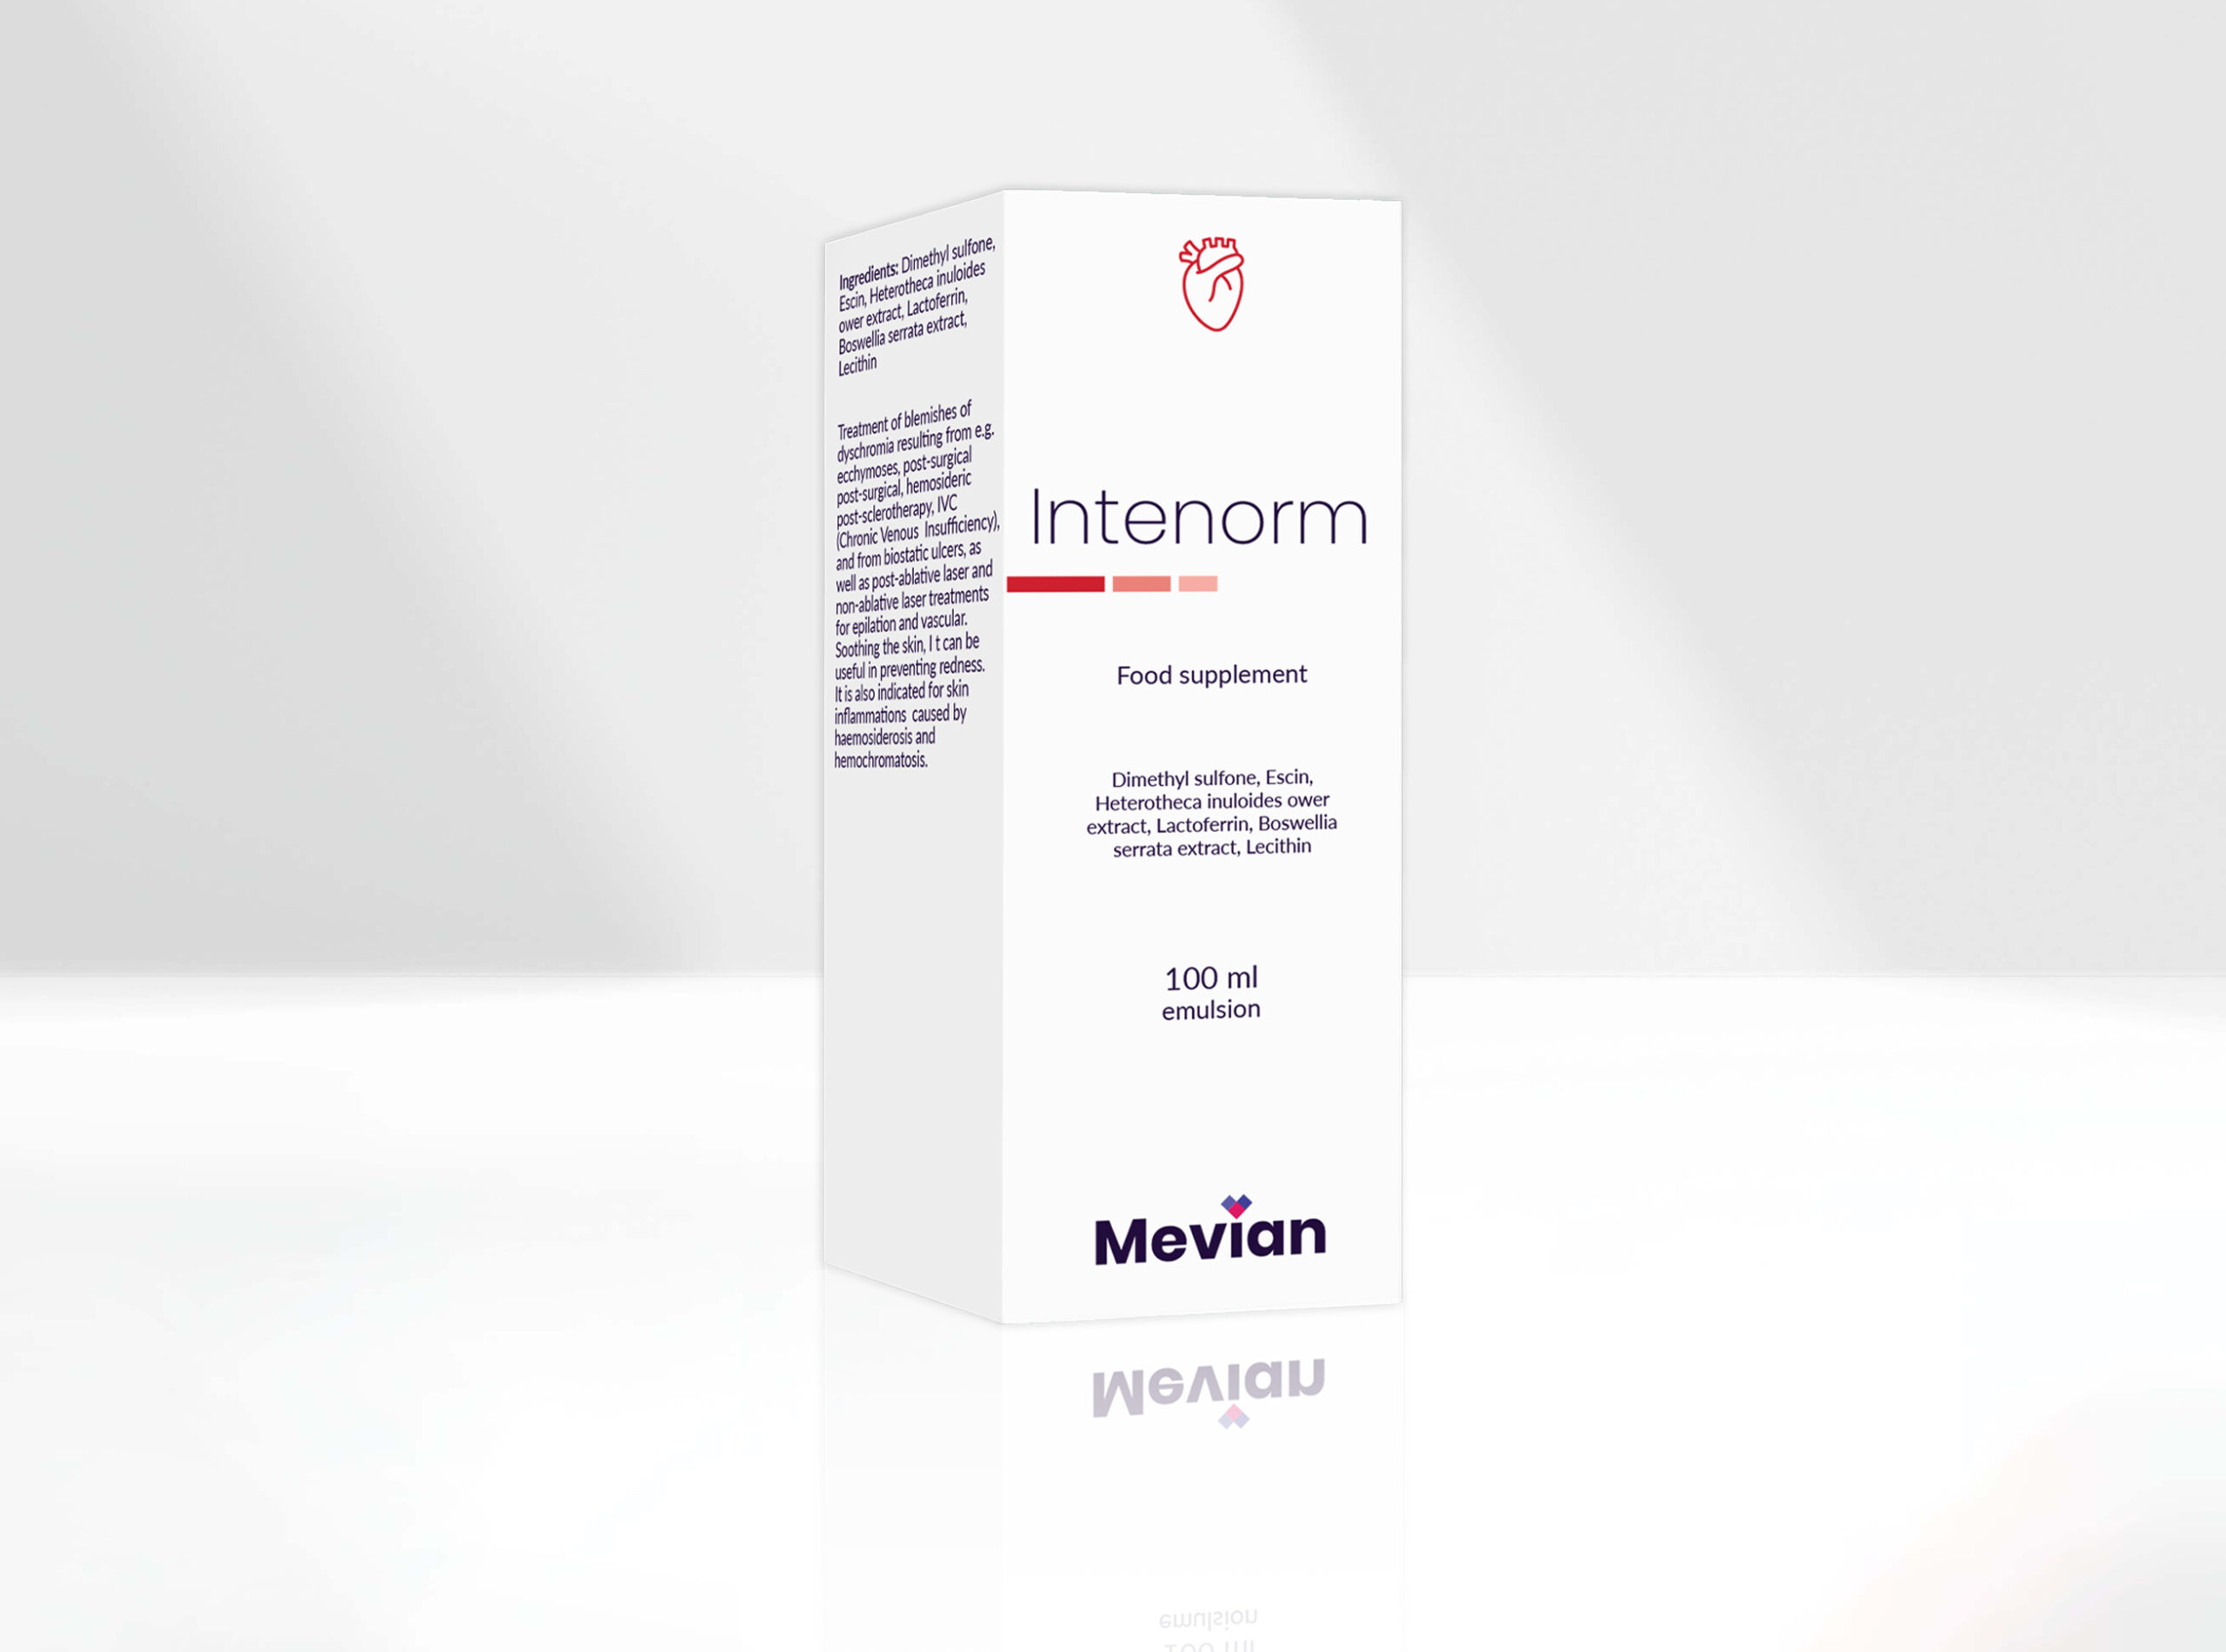 Intenorm is an effective remedy supplement for blemishes of dyschromia resulting from ecchymoses, post-surgical, hemosideric post-sclerotherapy, Chronic Venous Insufficiency, and from biostatic ulcers, as well as non and post-ablative laser treatments for epilation and vascular.